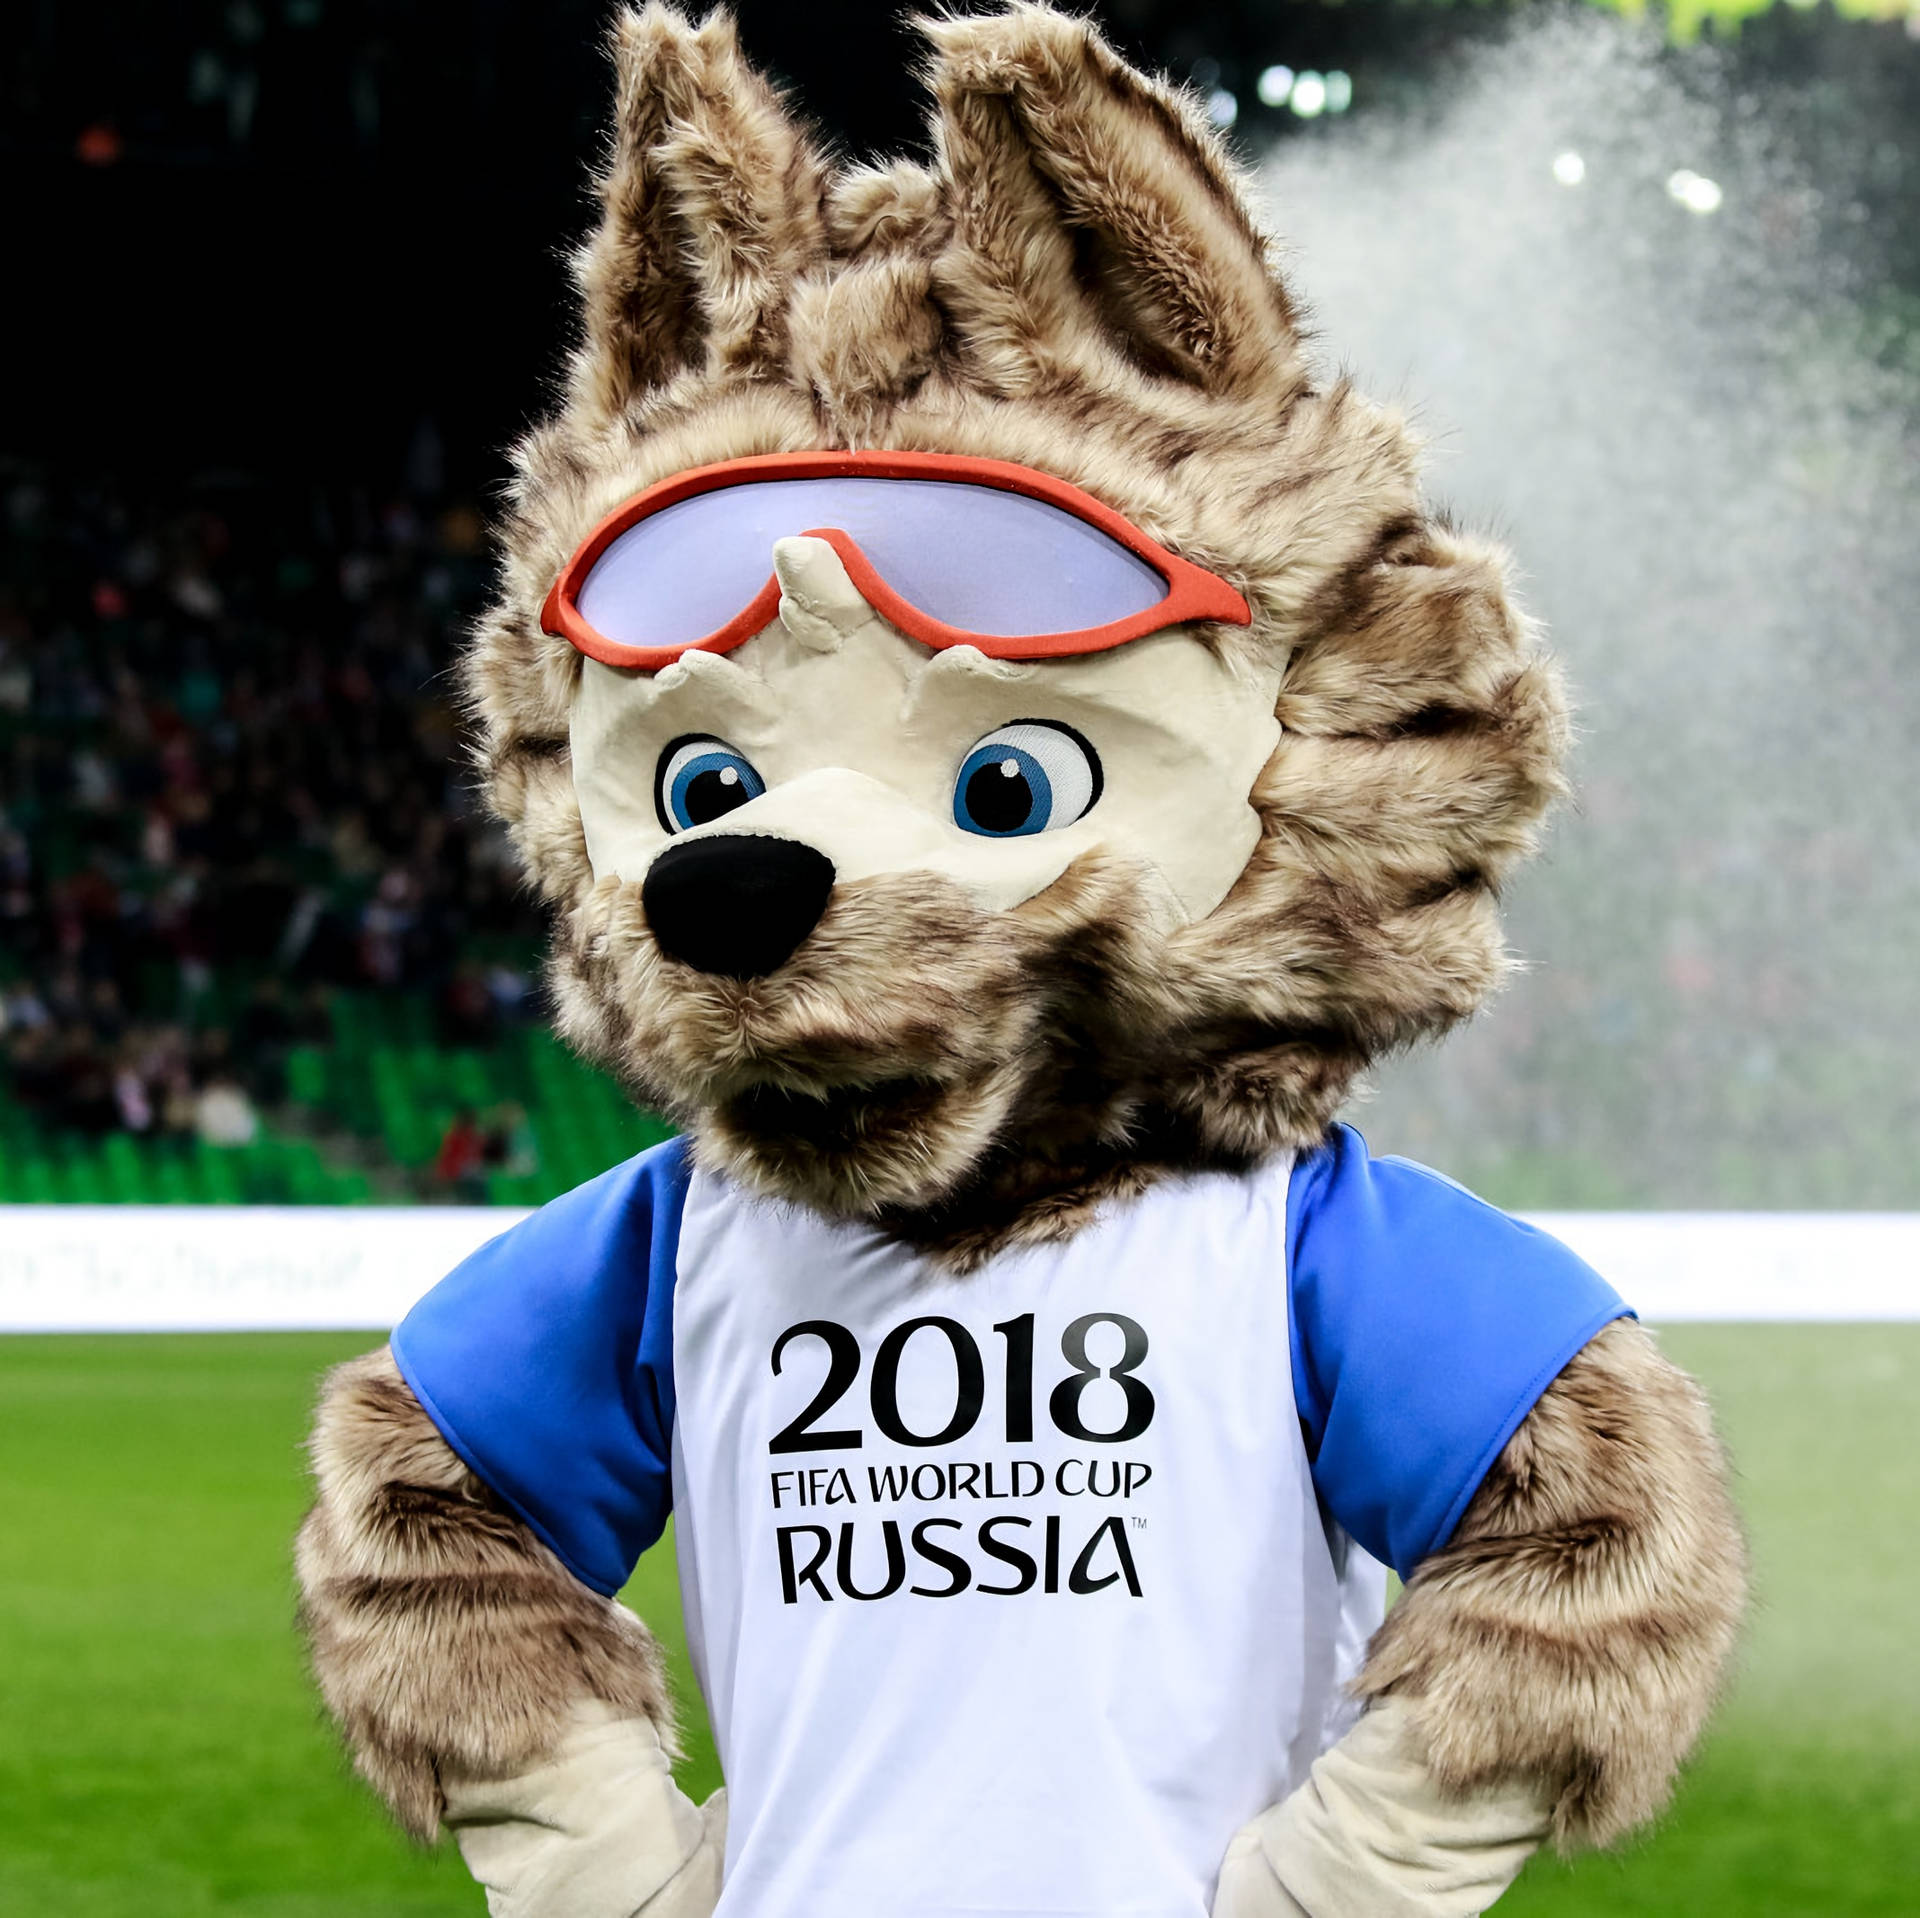 Russian World Cup Mascot 2018 Picture